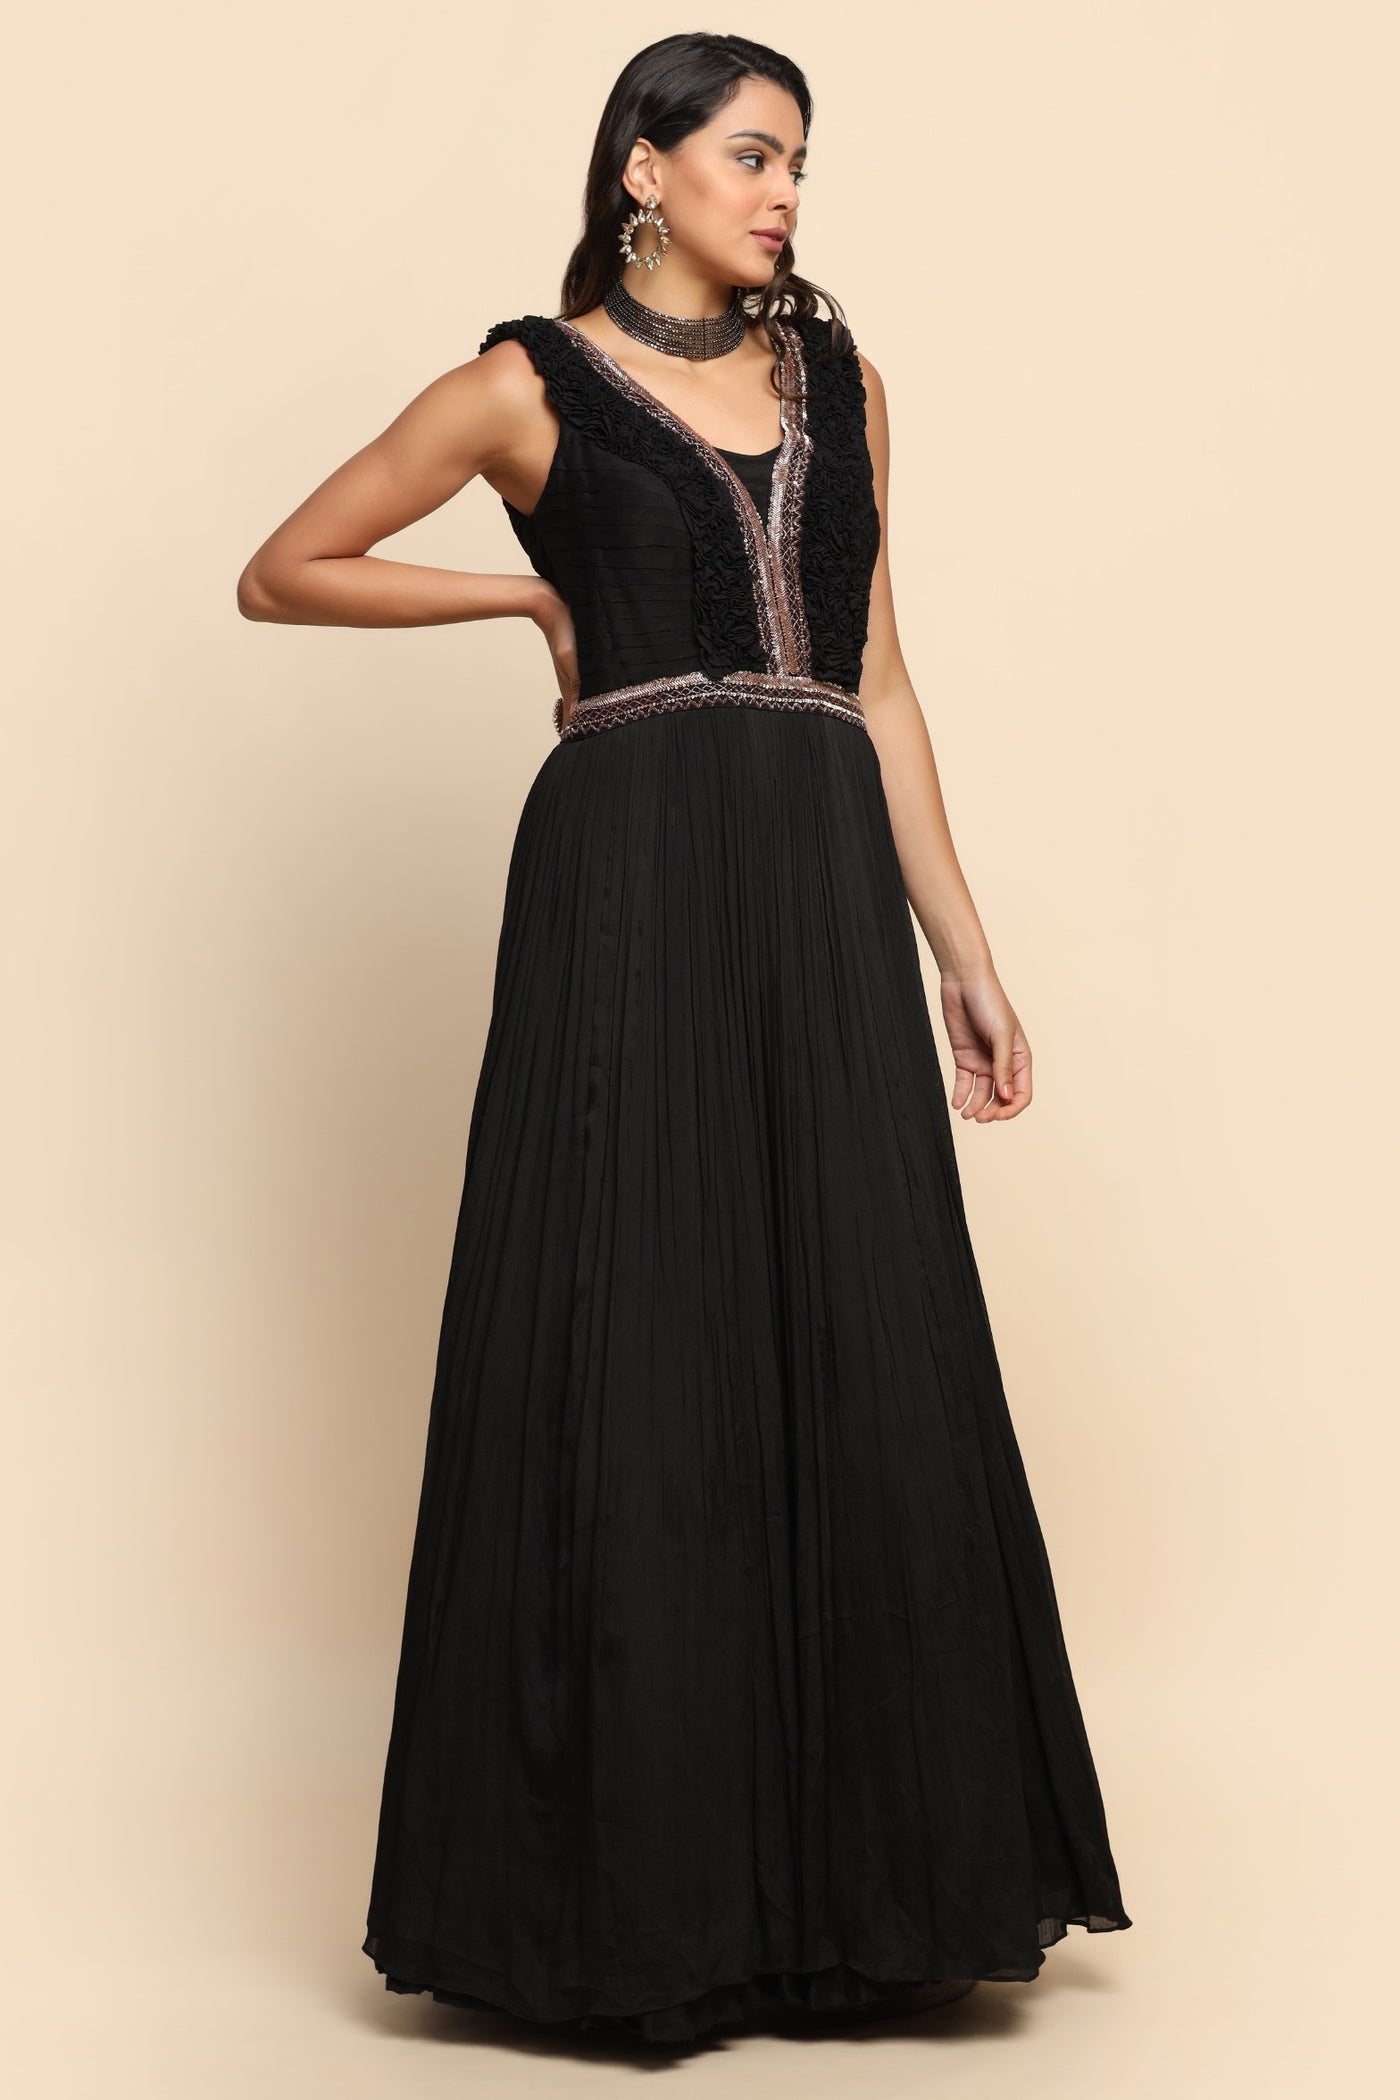 Classic black color dress with ruffles